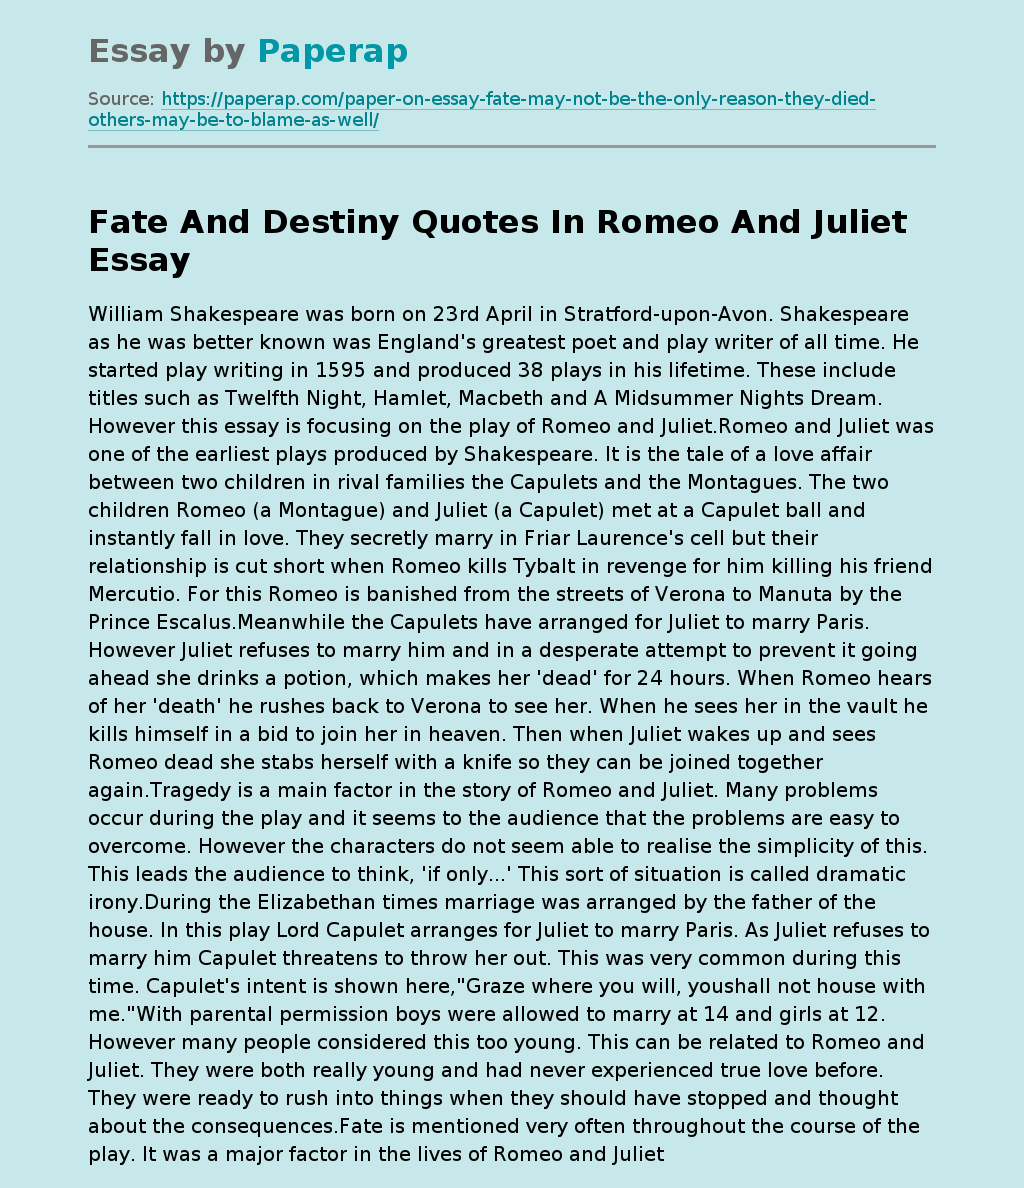 Fate And Destiny Quotes In Romeo And Juliet